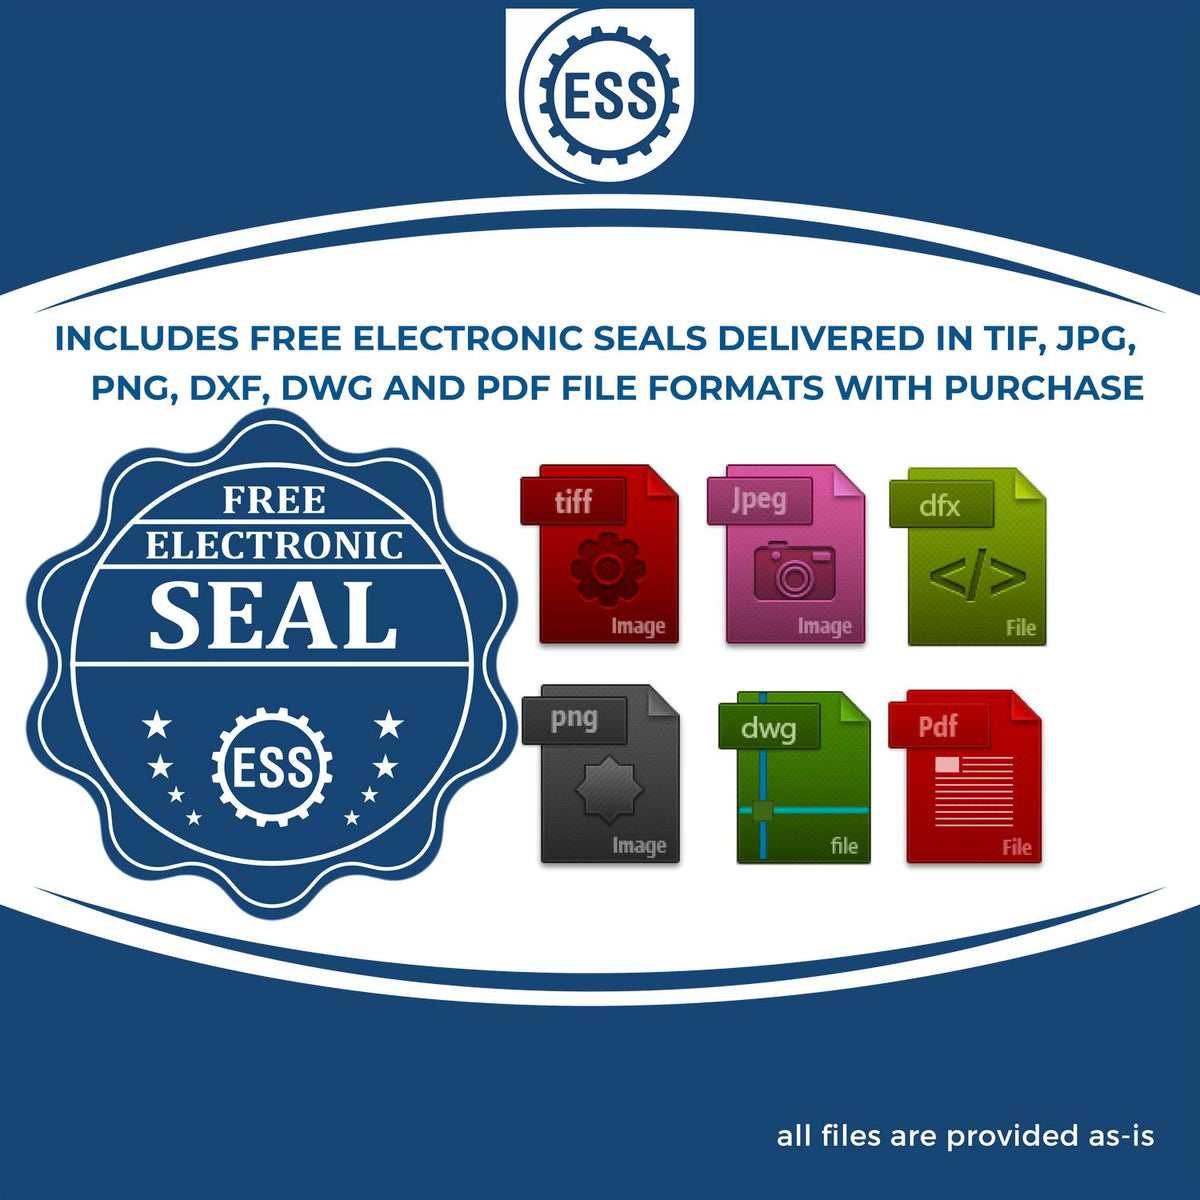 An infographic for the free electronic seal for the Slim Pre-Inked California Professional Engineer Seal Stamp illustrating the different file type icons such as DXF, DWG, TIF, JPG and PNG.